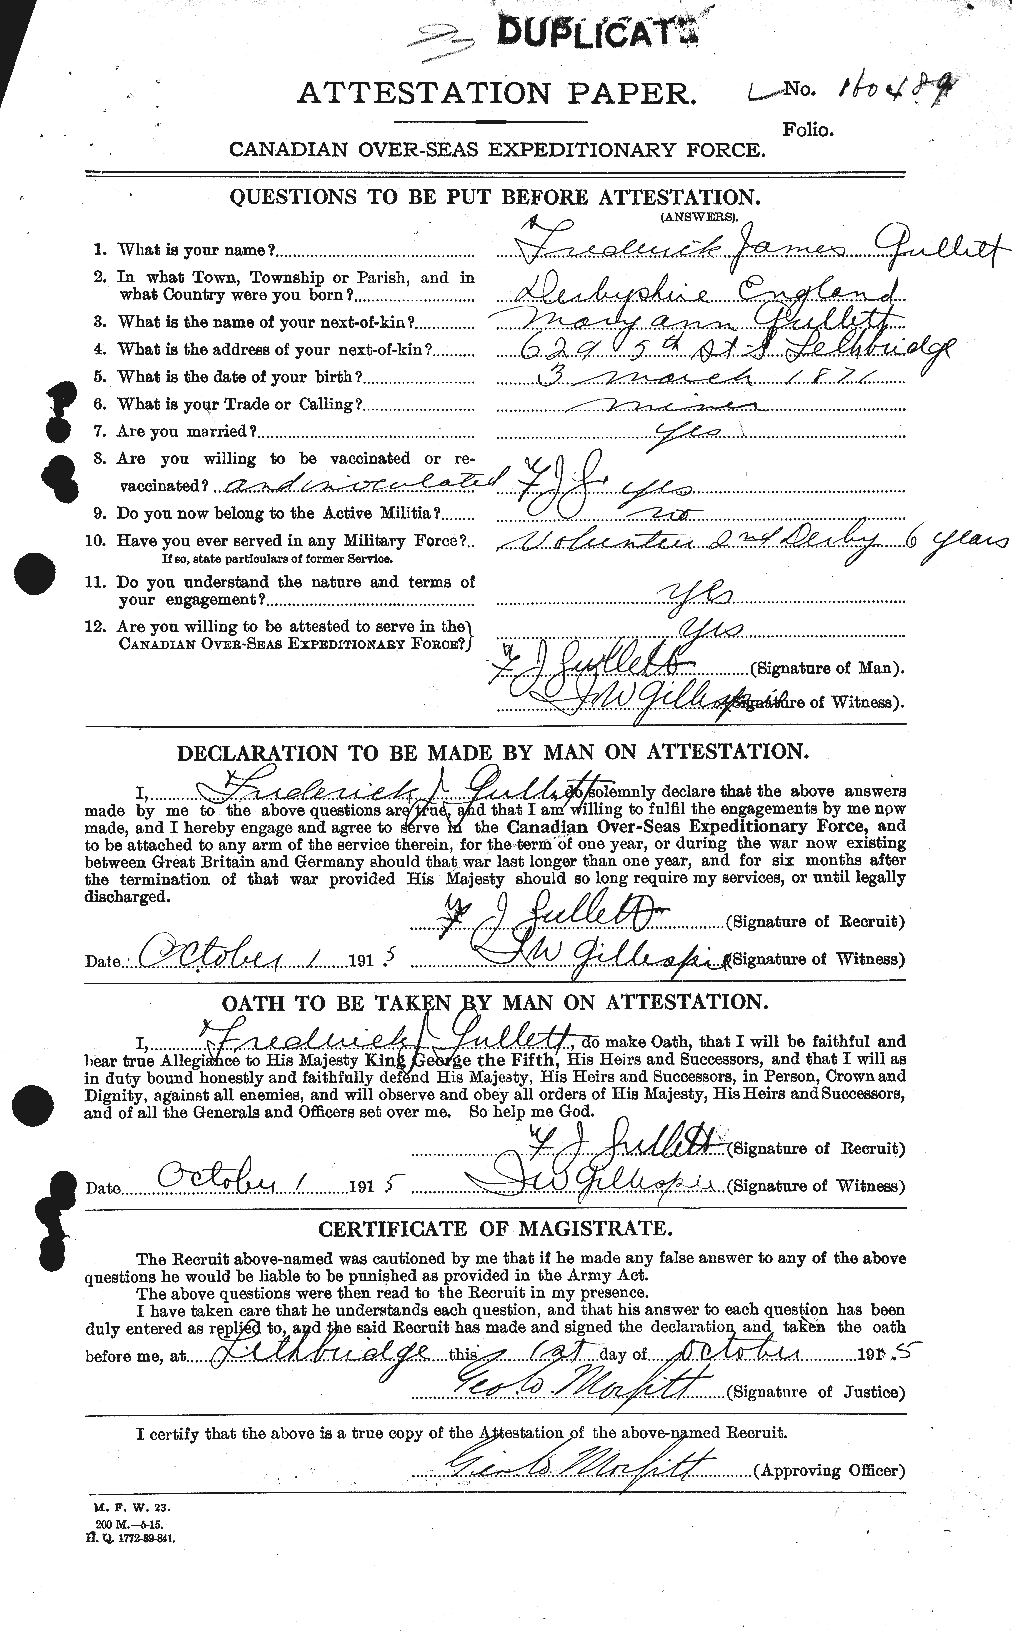 Personnel Records of the First World War - CEF 367874a